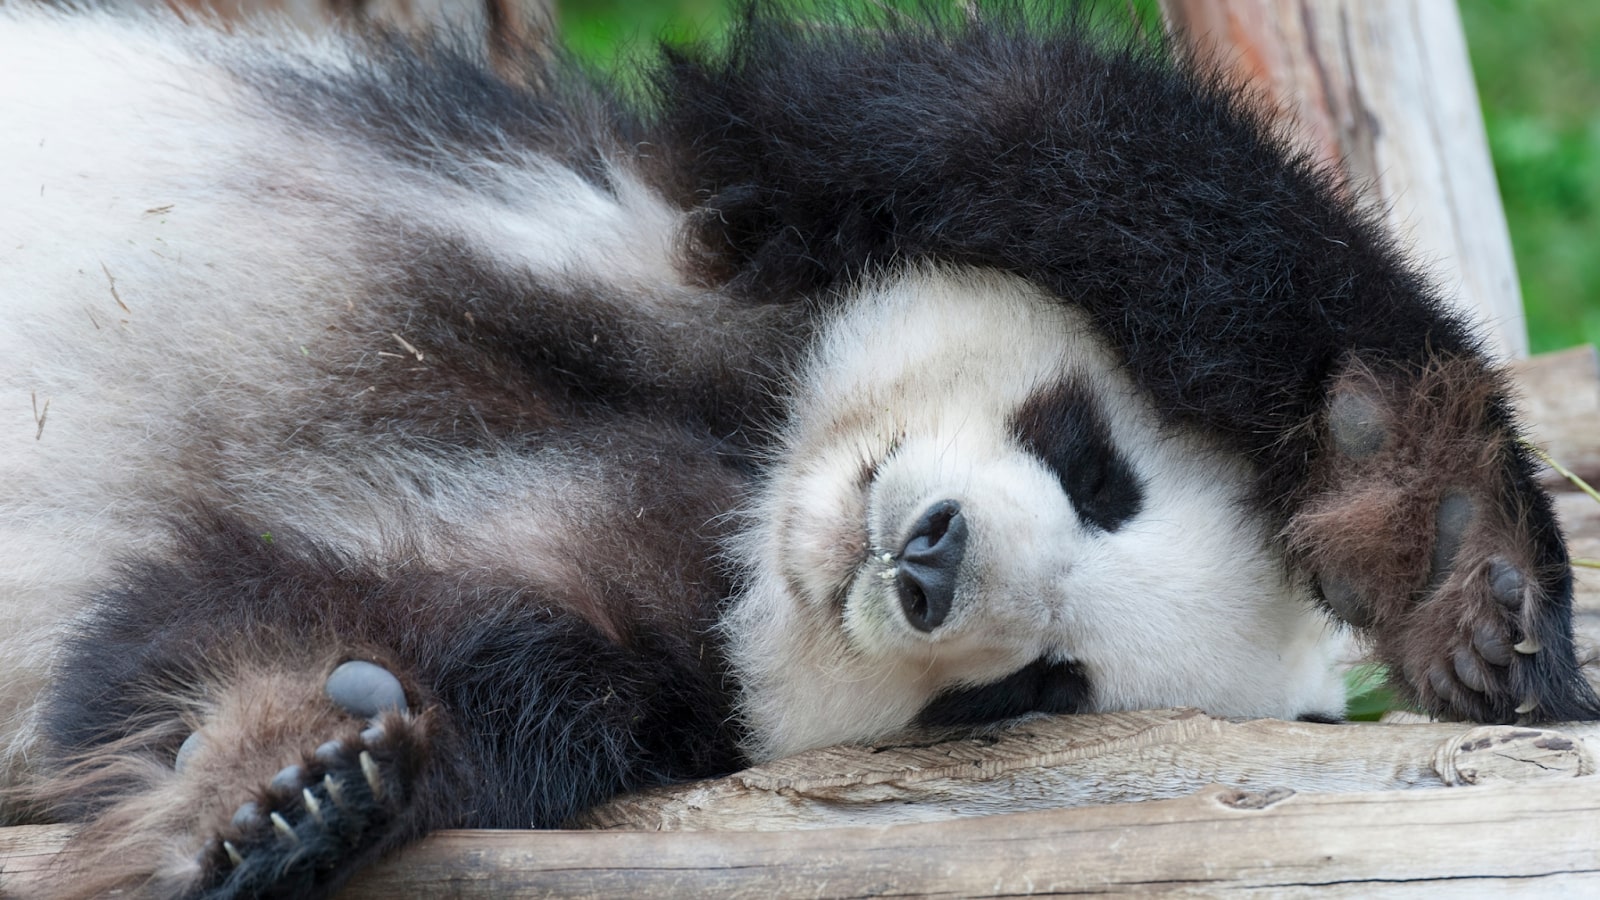 Image with a panda gentle closing eyes and taking a nap